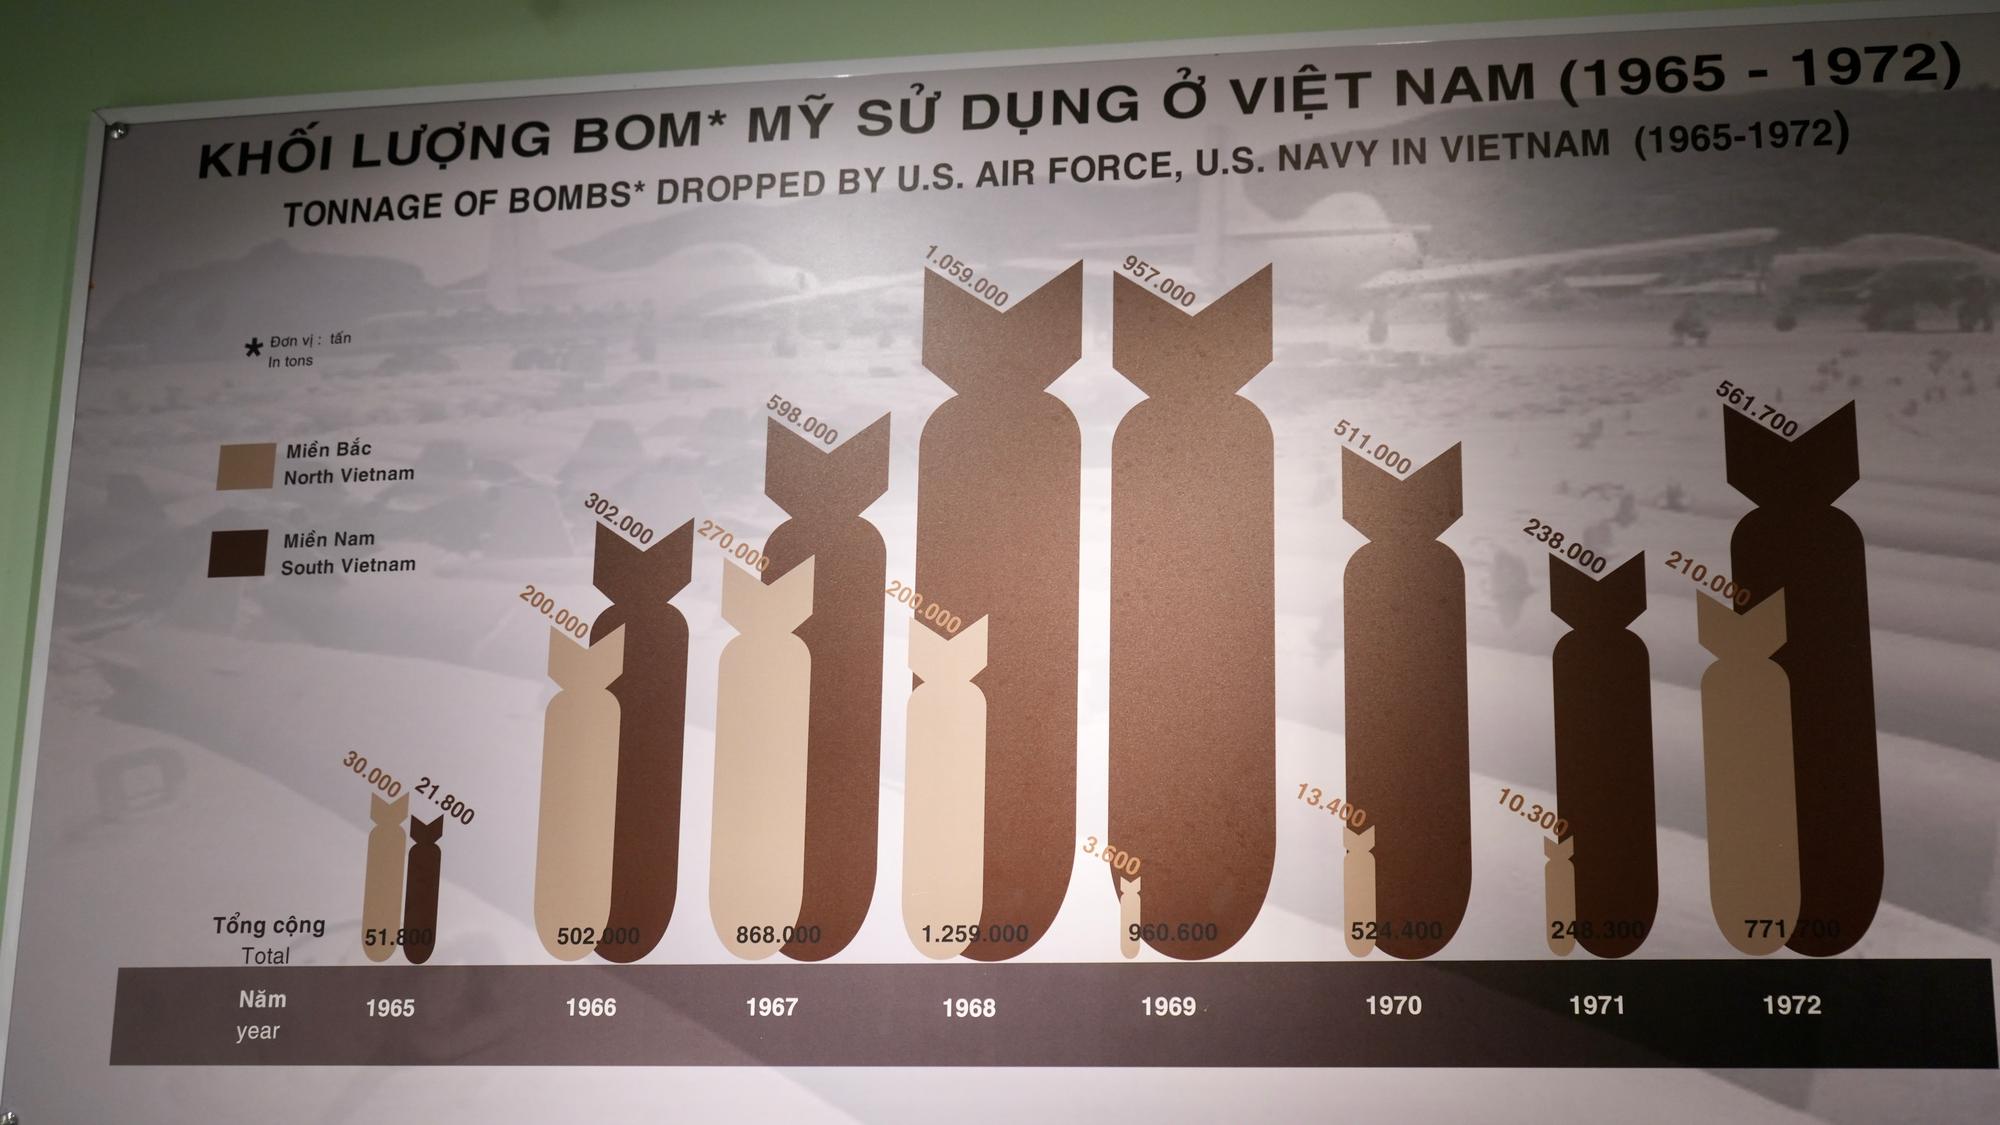 Amount of bombs dropped by the Americans and the North Vietnamese